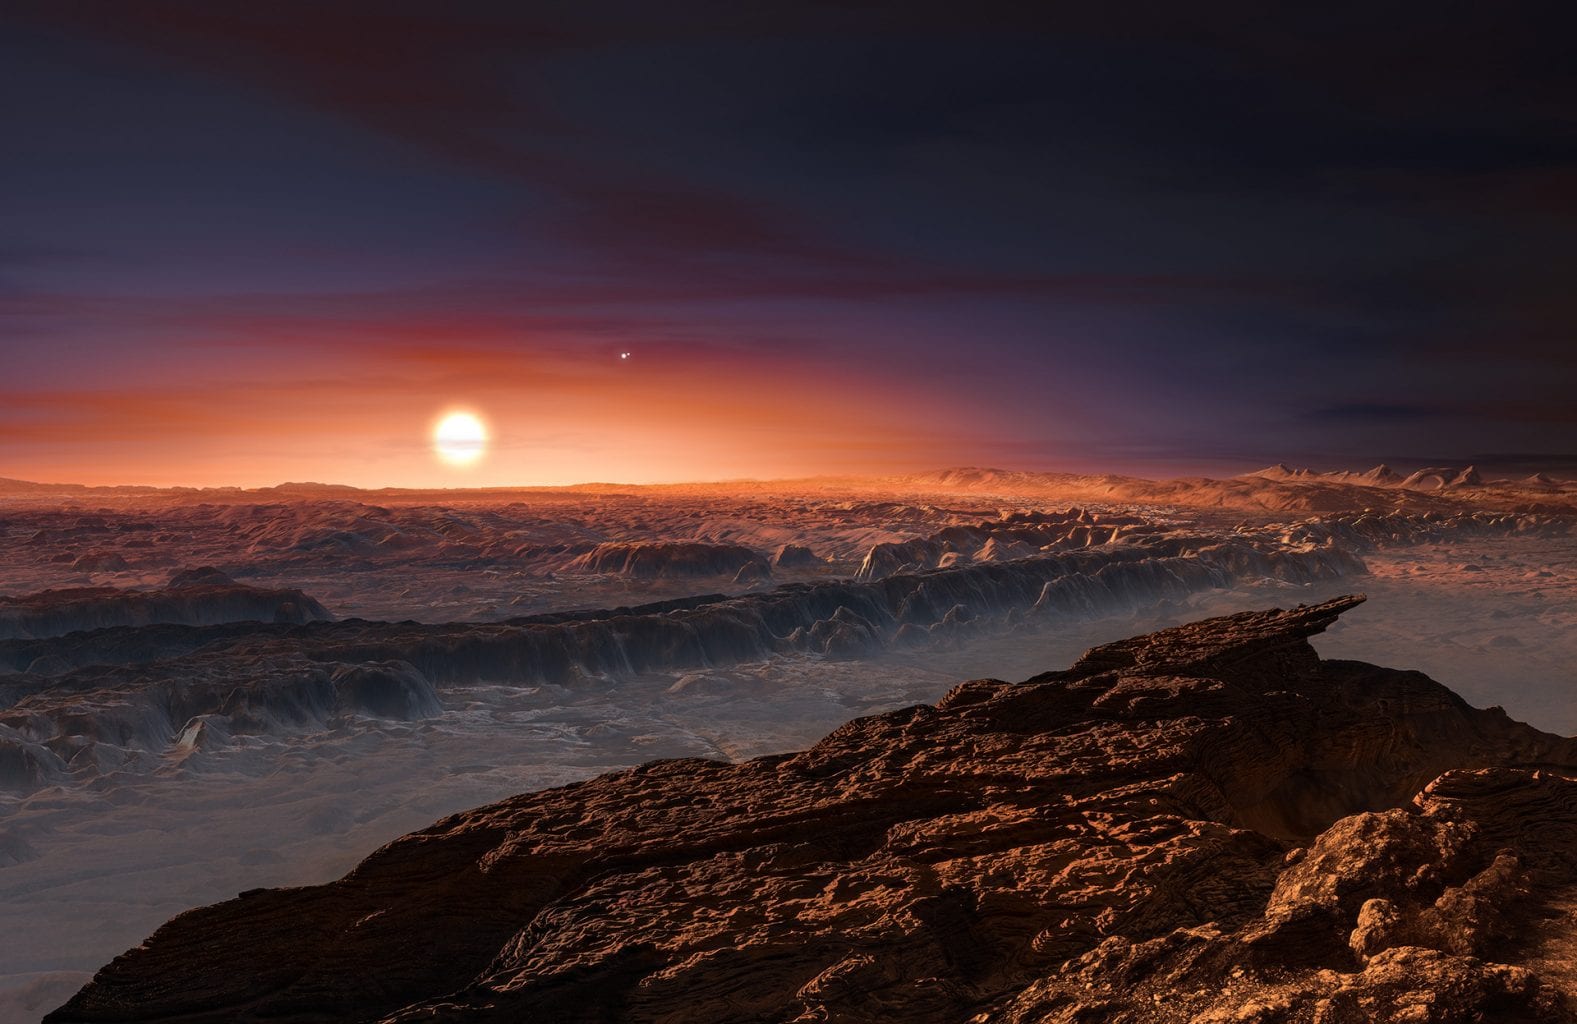 View from the surface of the exoplanet Proxima b as seen by the artist. Credit: ESO / M. Kornmesser